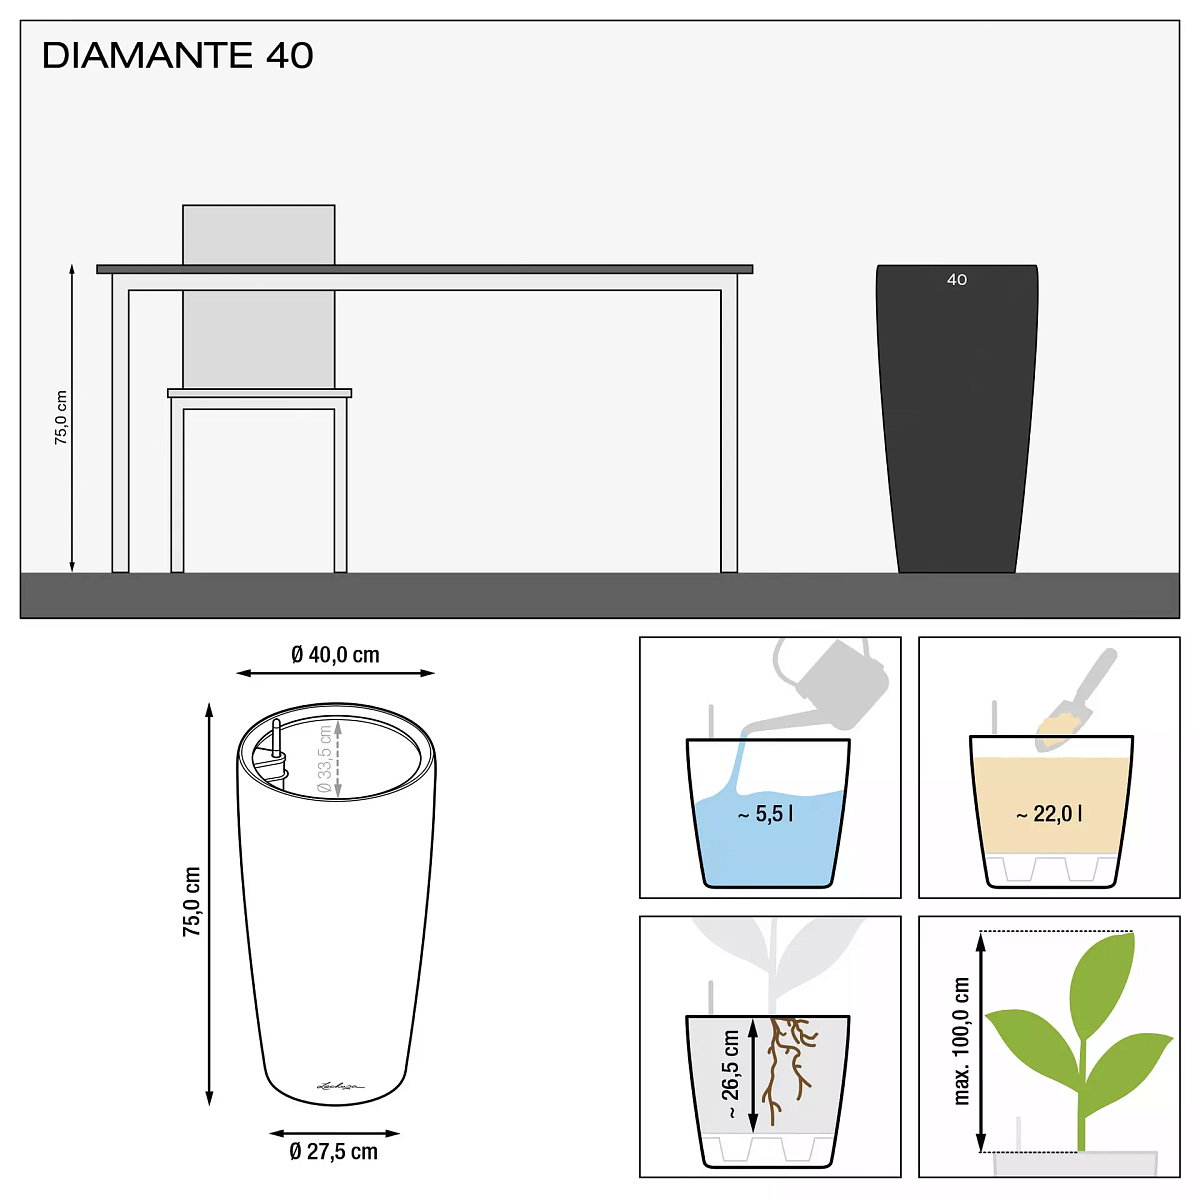 LECHUZA DIAMANTE Premium Poly Resin Floor Self-watering Planter with Substrate and Water Level Indicator - citiplants.com